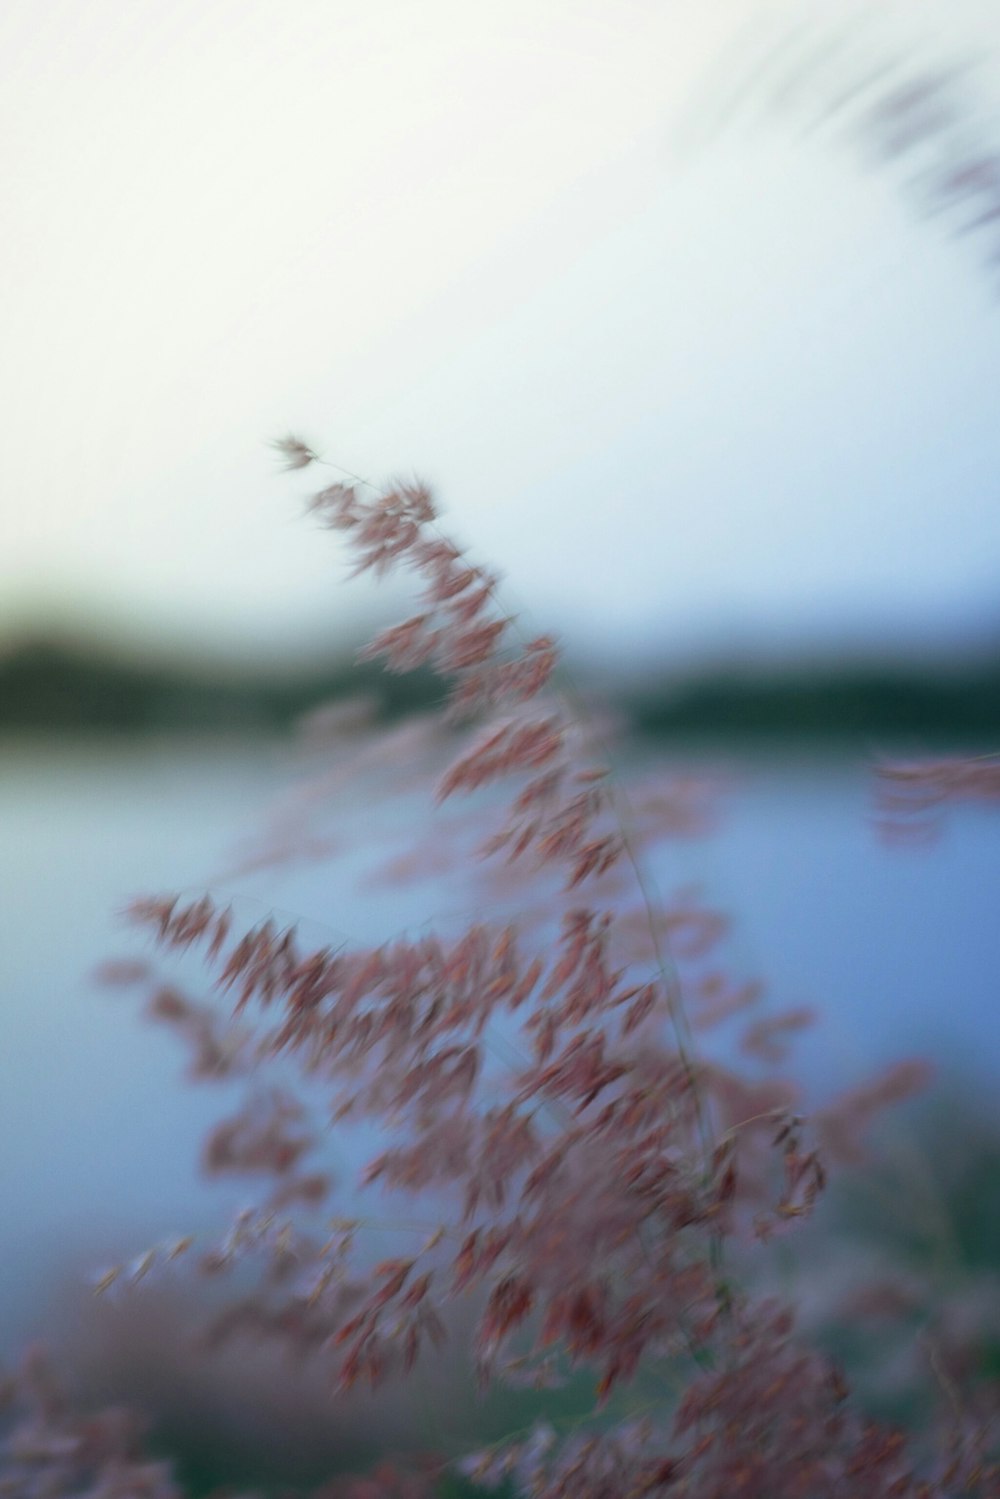 a blurry photo of a plant next to a body of water